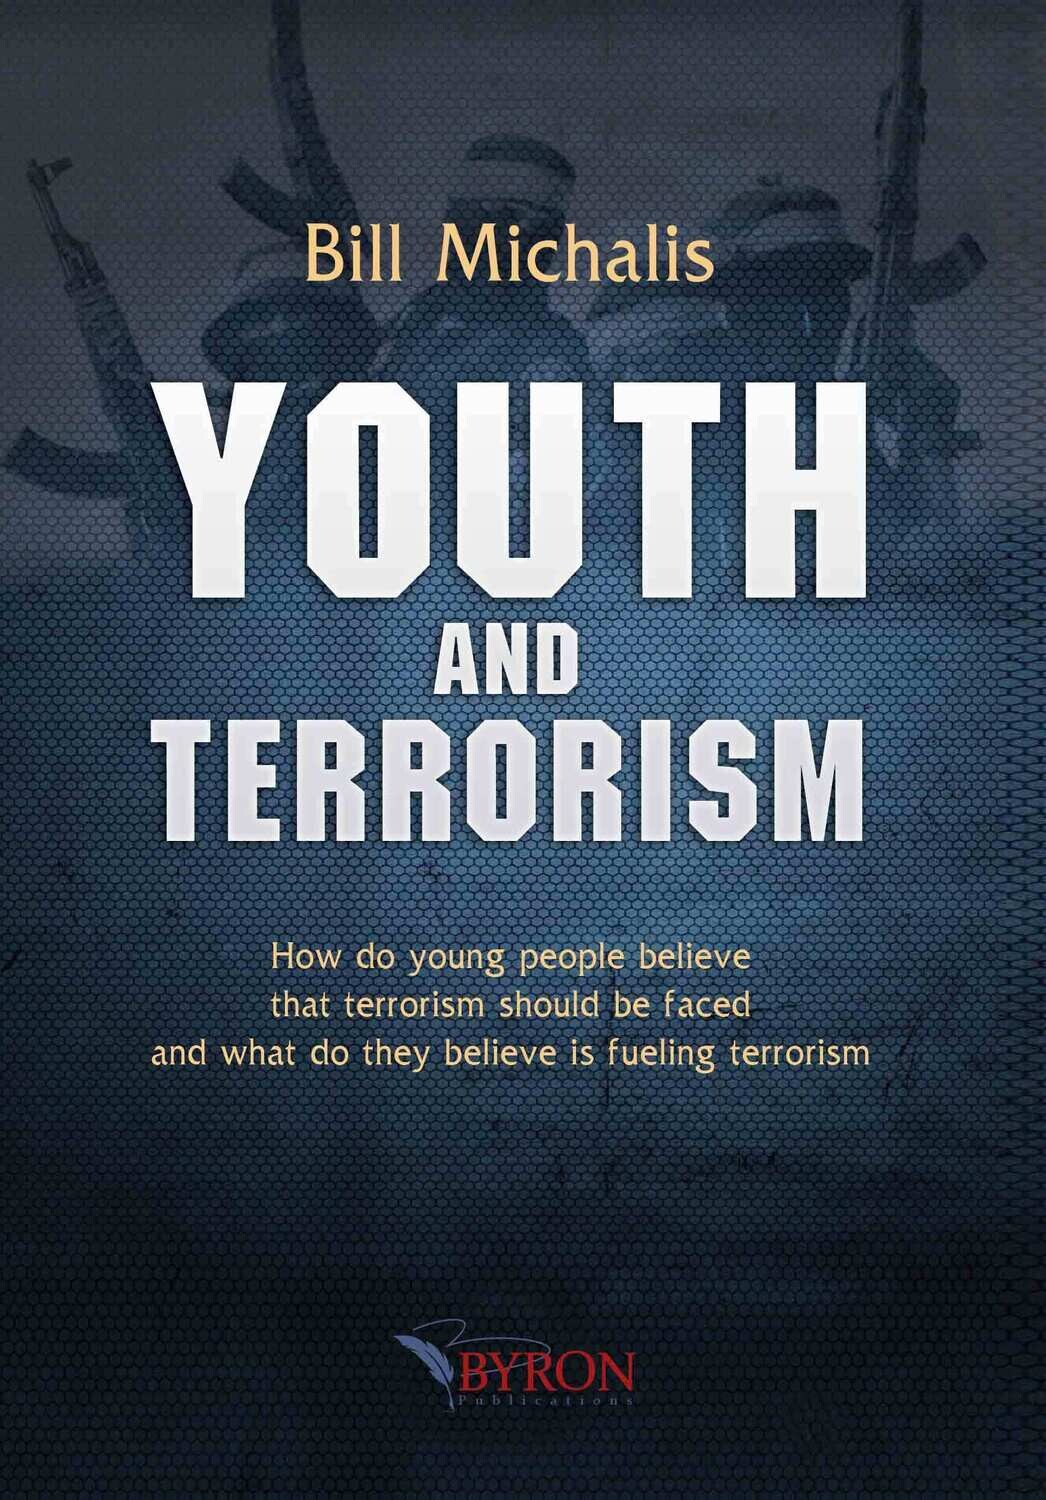 YOUTH AND TERRORISM / Bill Michalis